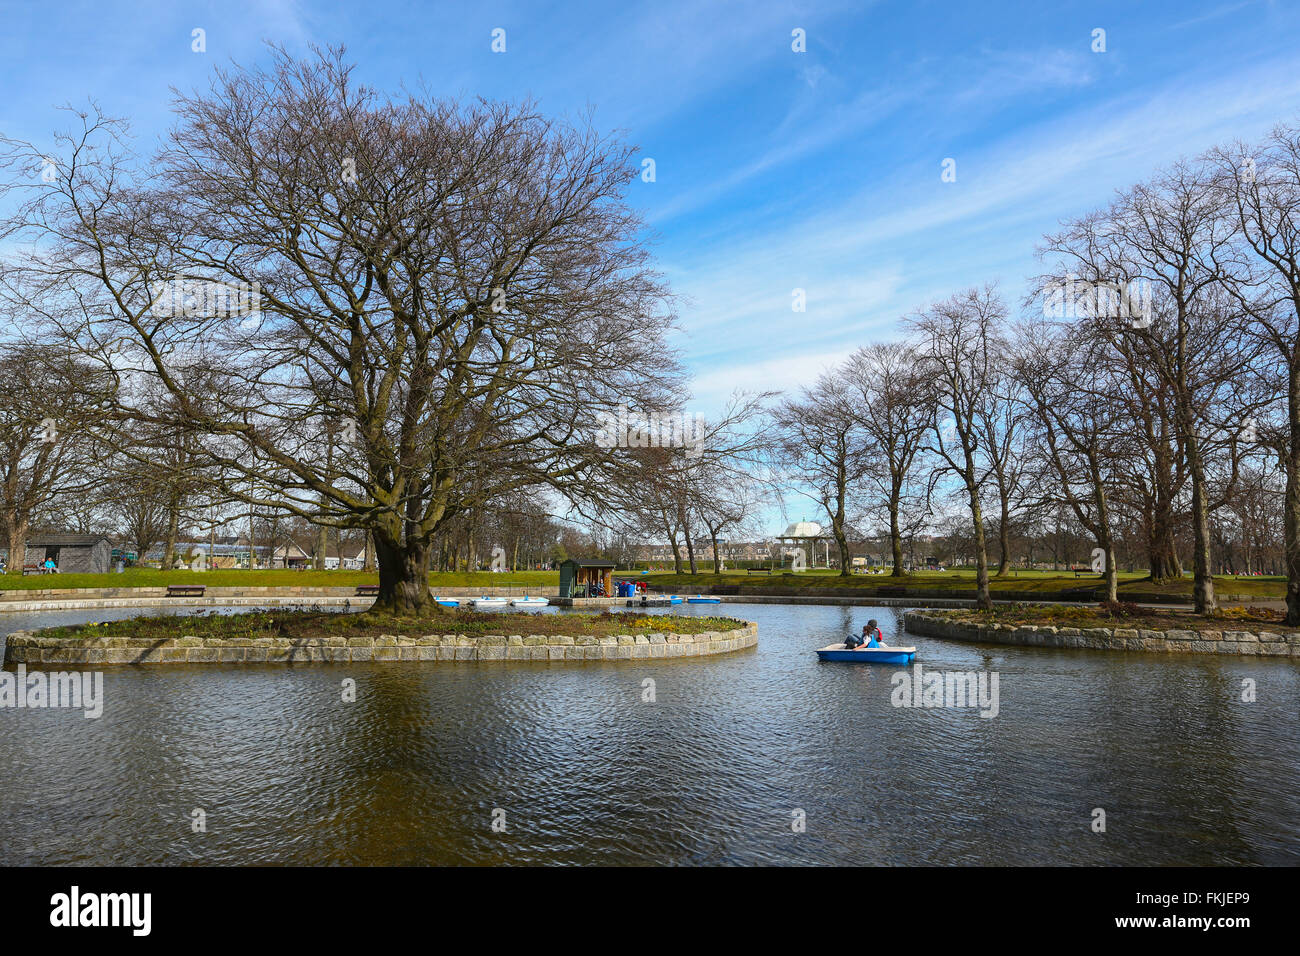 Pedal boats on the traditional boating pond within Duthie Park in the city of Aberdeen, Scotland, UK Stock Photo